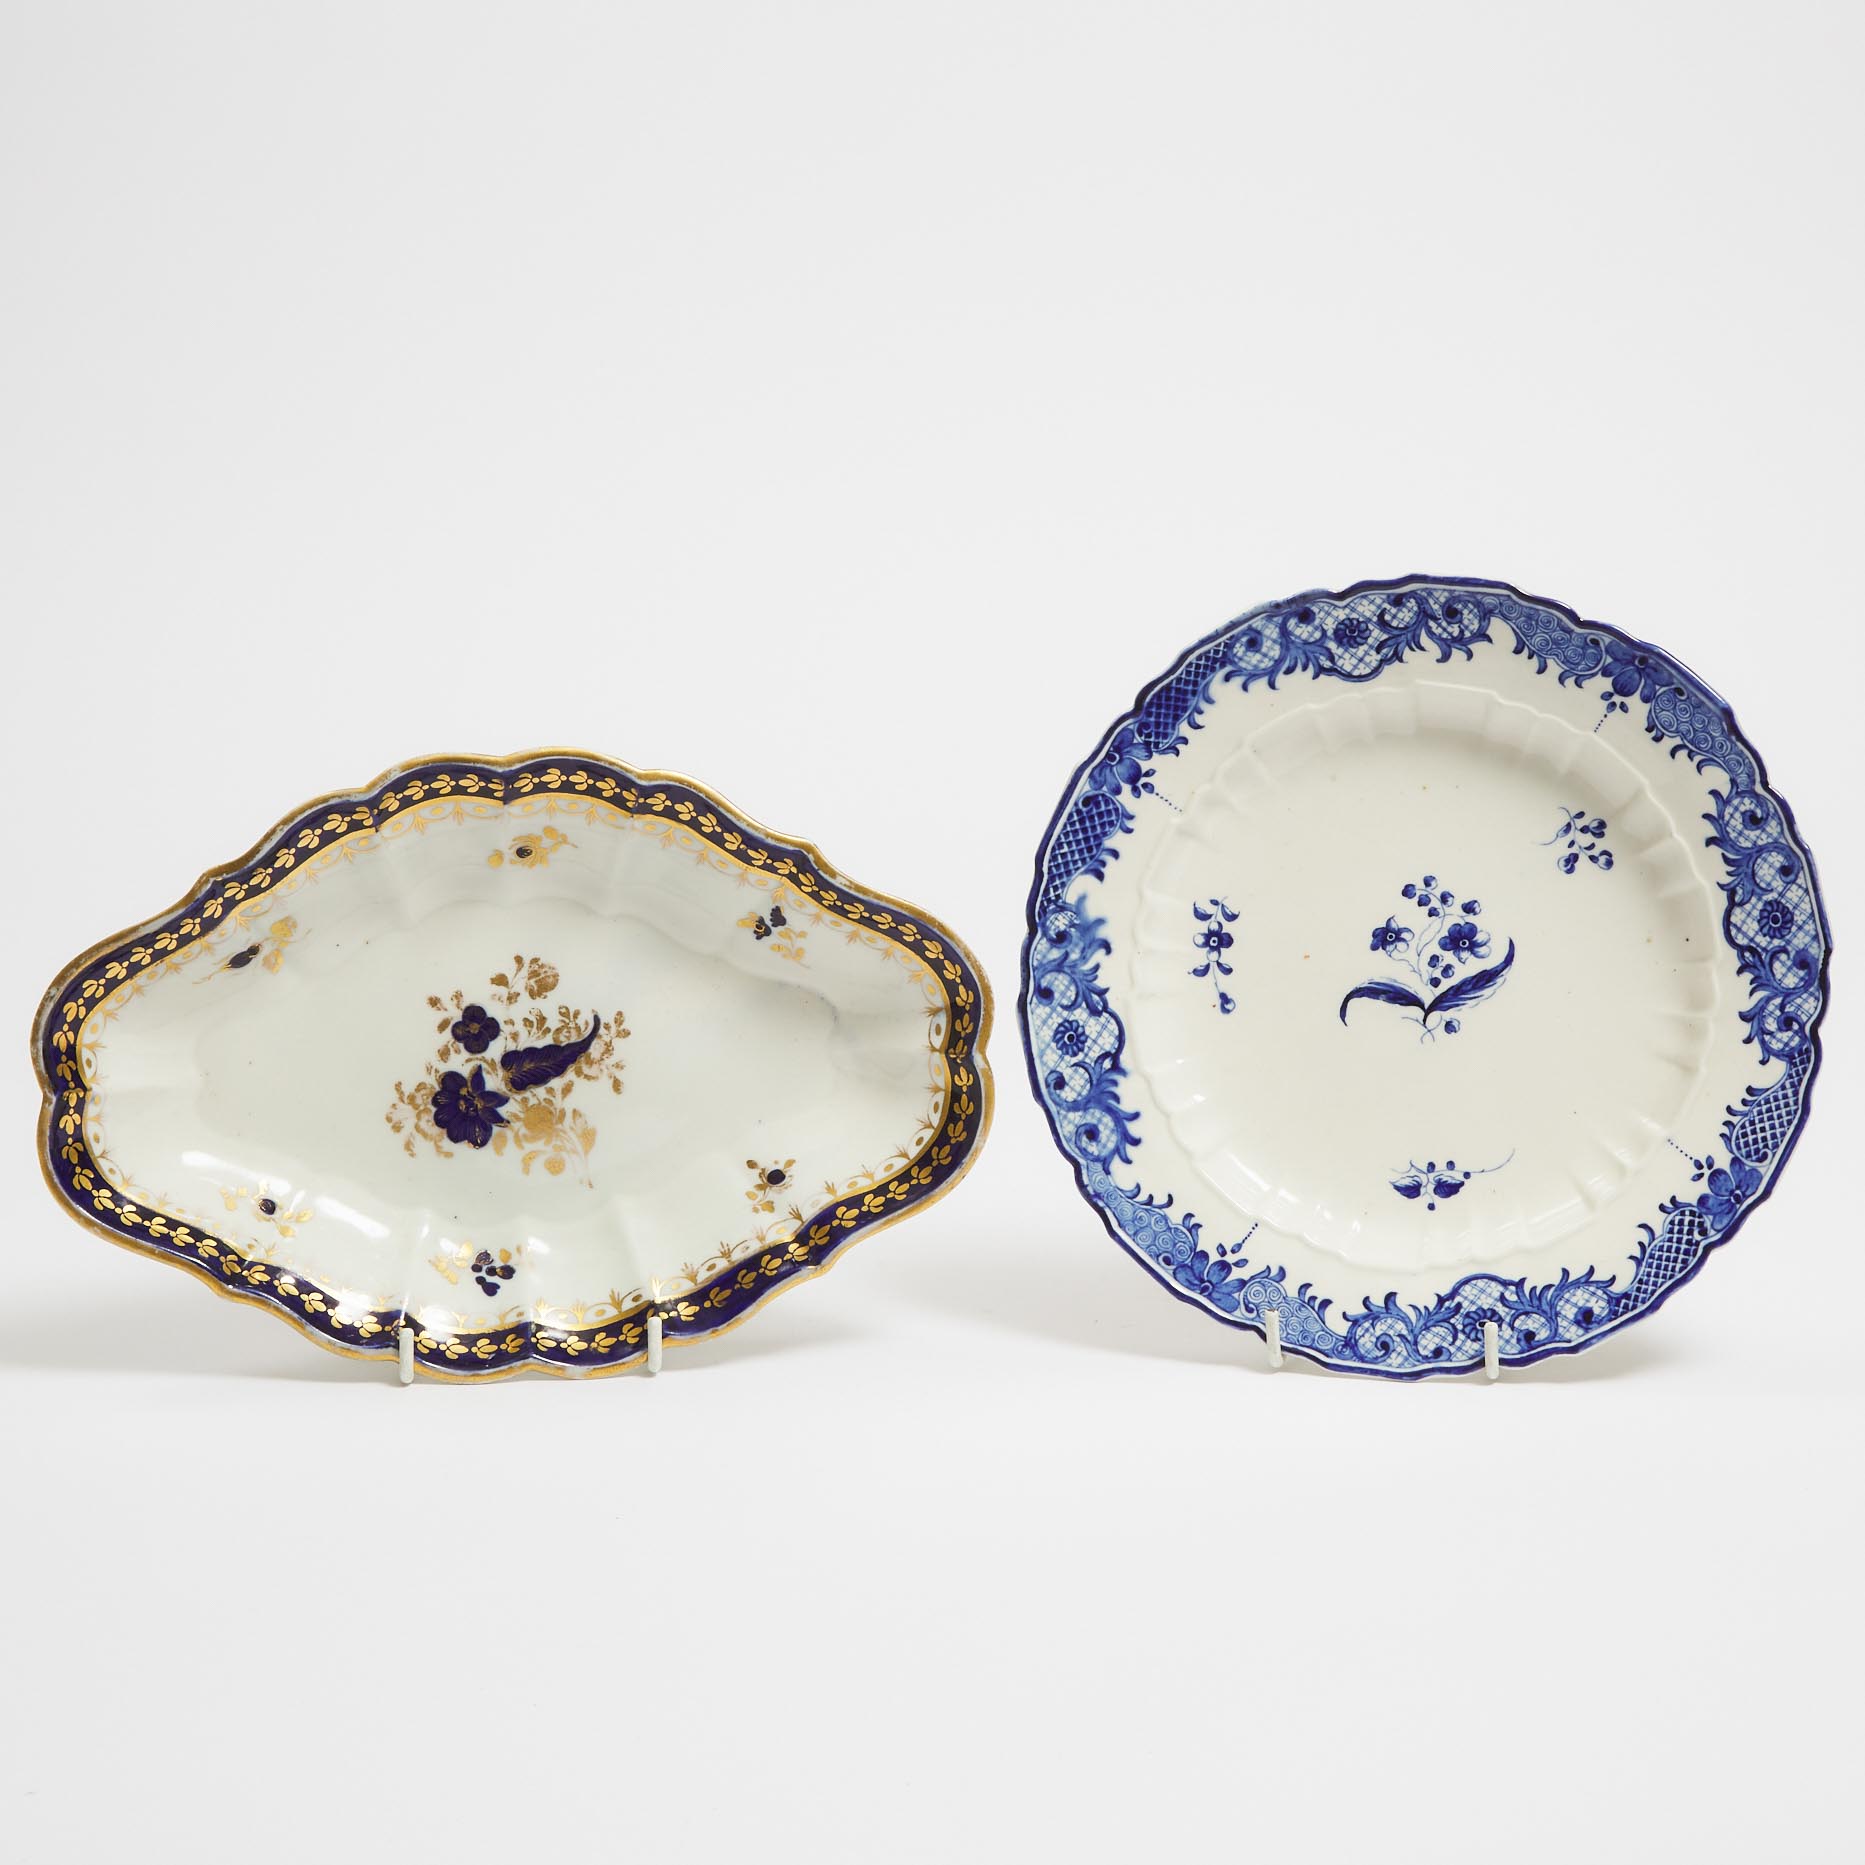 Caughley Lozenge Shaped Dessert Dish and a Régence Plate, late 18th century